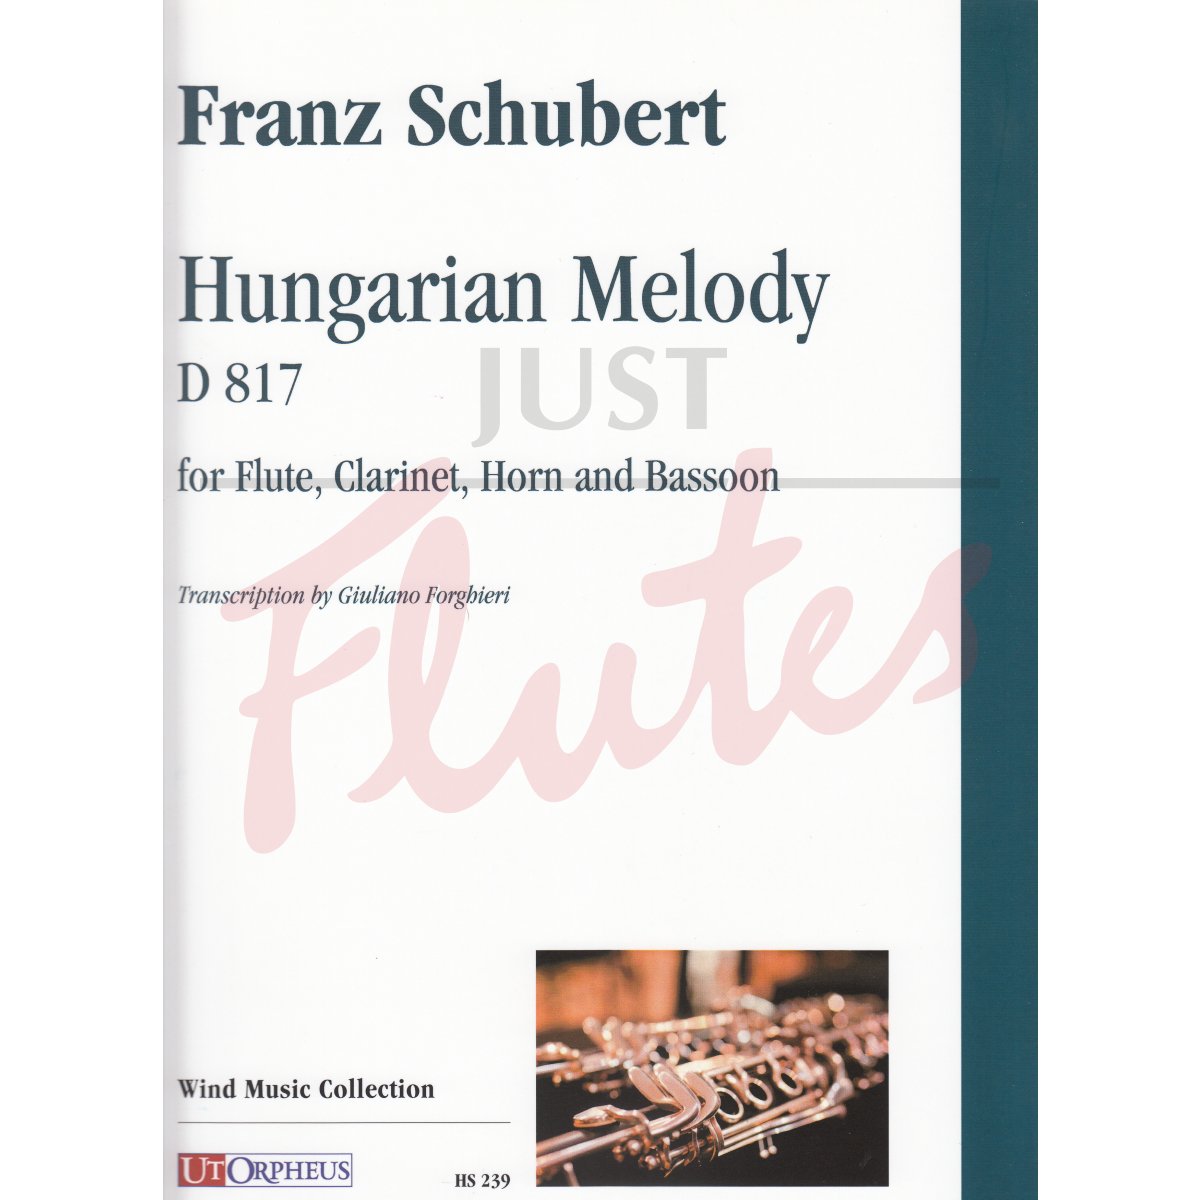 Hungarian Melody arranged for Flute, Clarinet, Horn, Bassoon